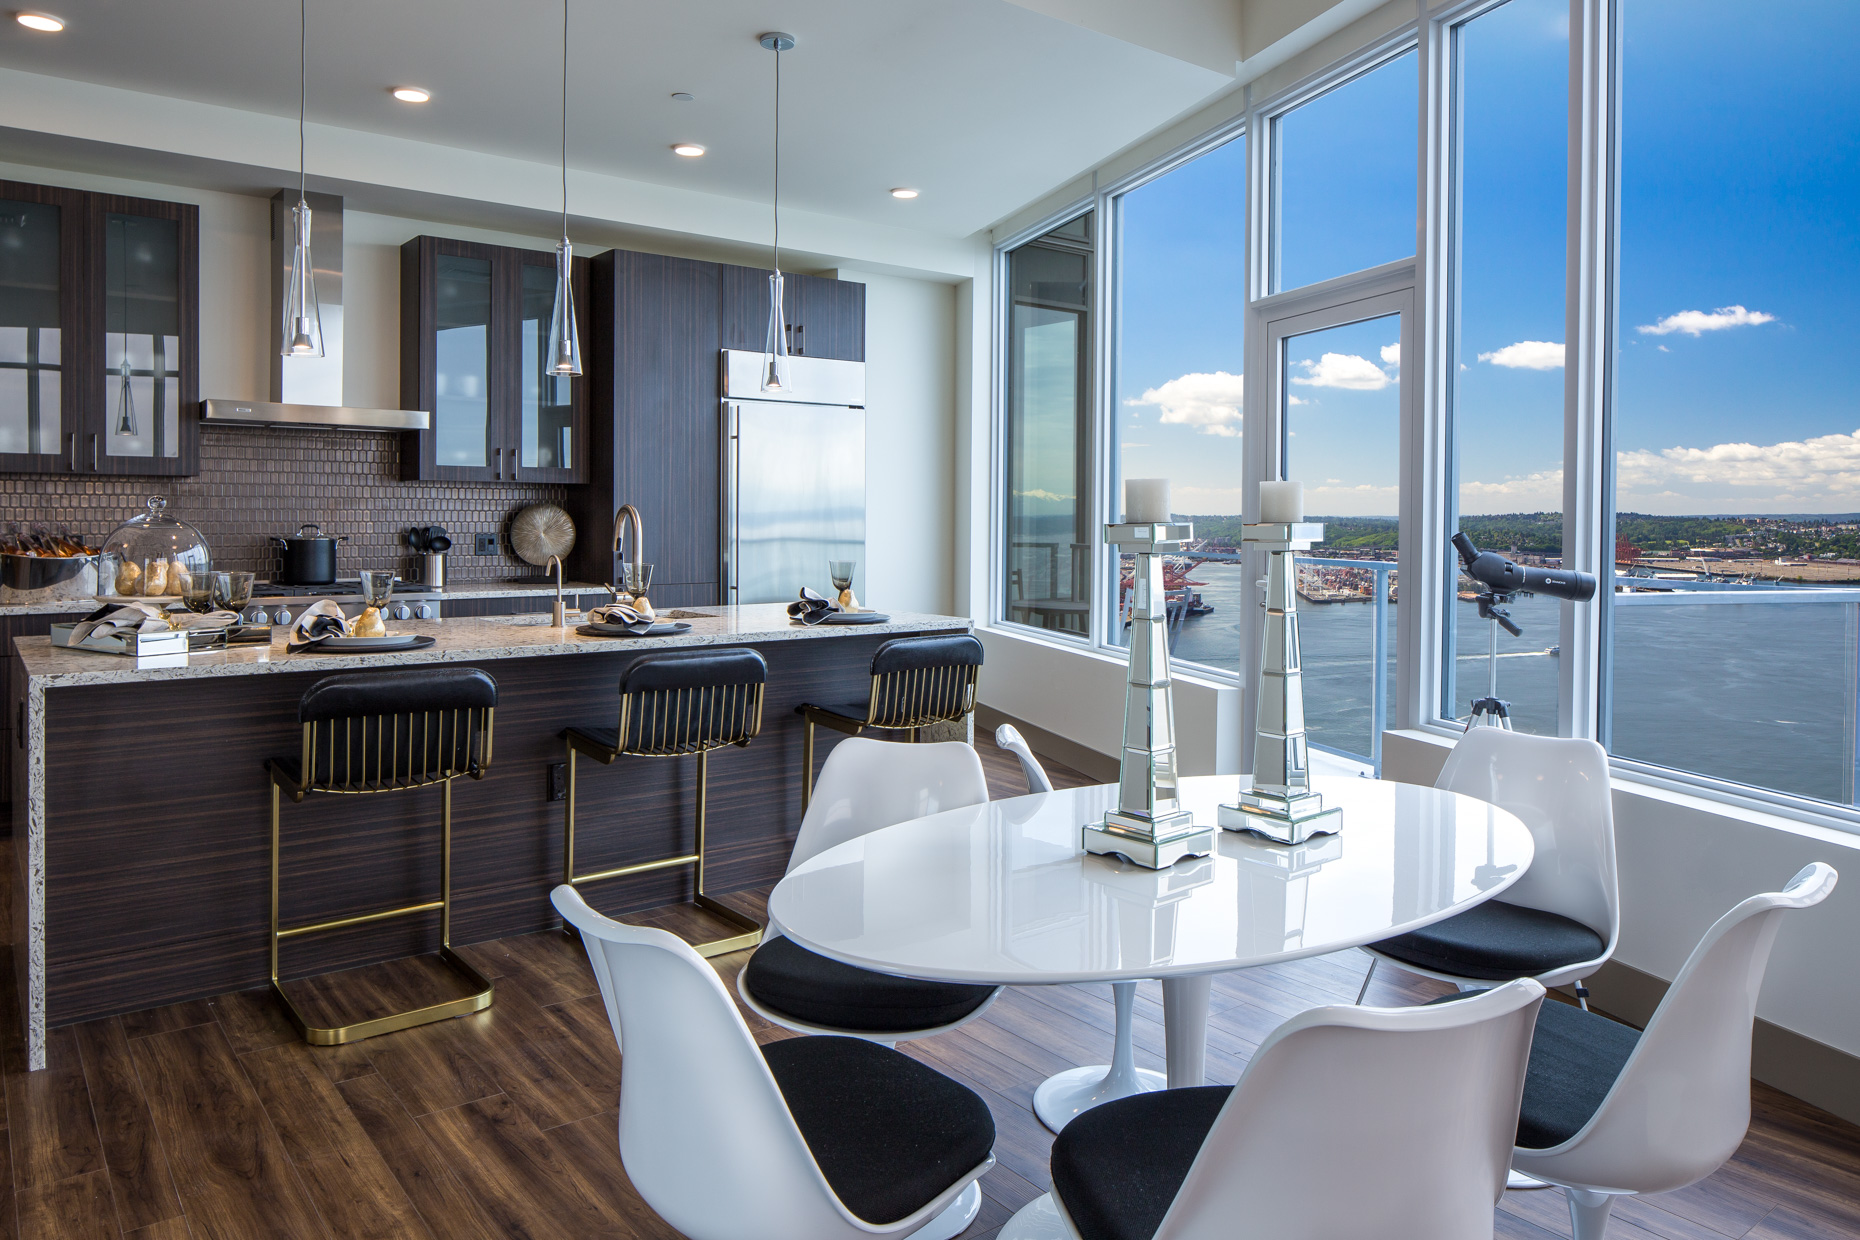 Penthouse Kitchen  and dining room with ocean views